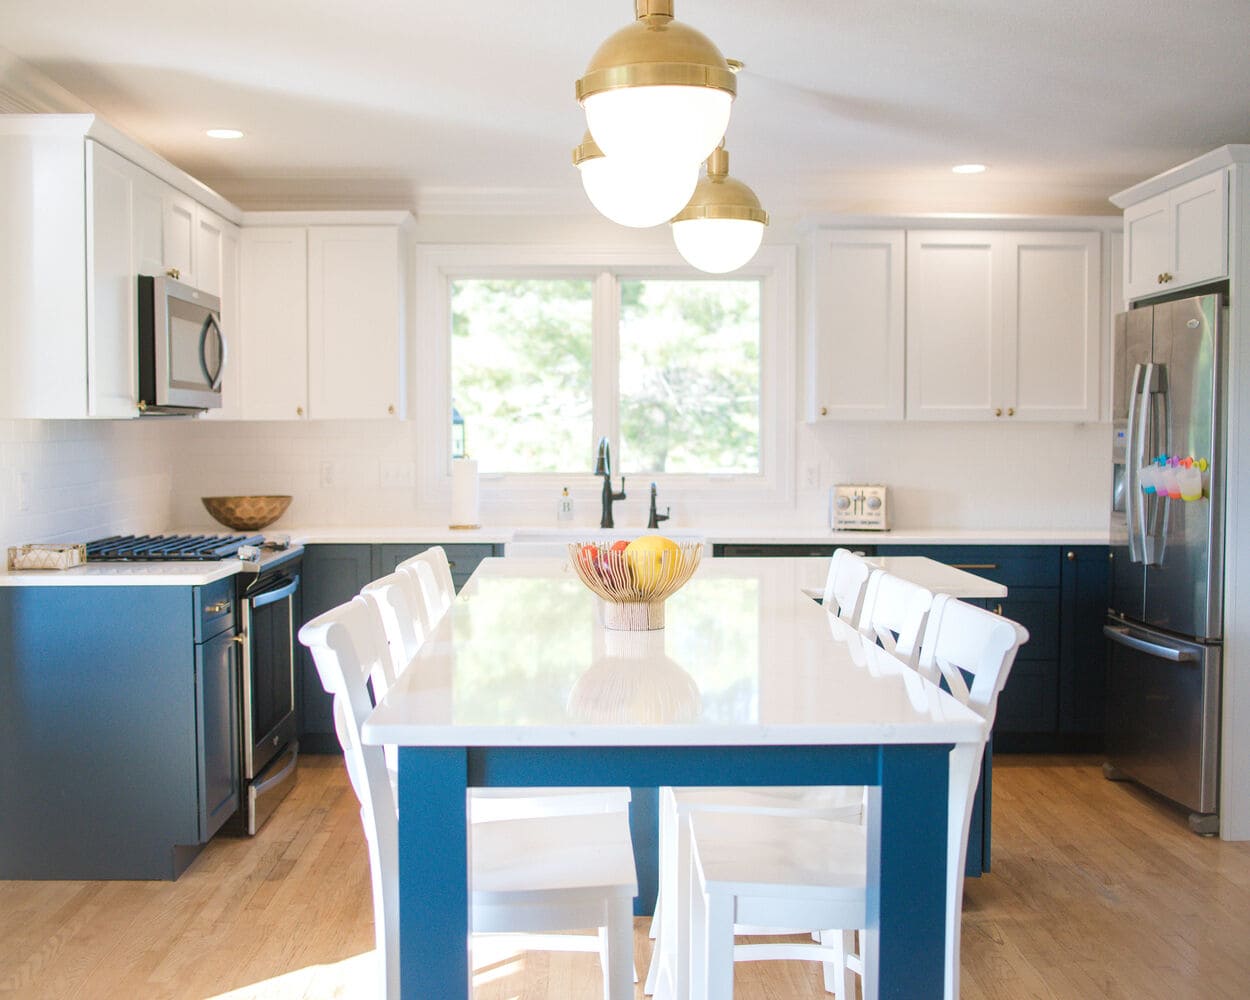 Two-Tone Kitchen Remodel With Blue Lower Level Cabinets and White Upper Level Cabinets